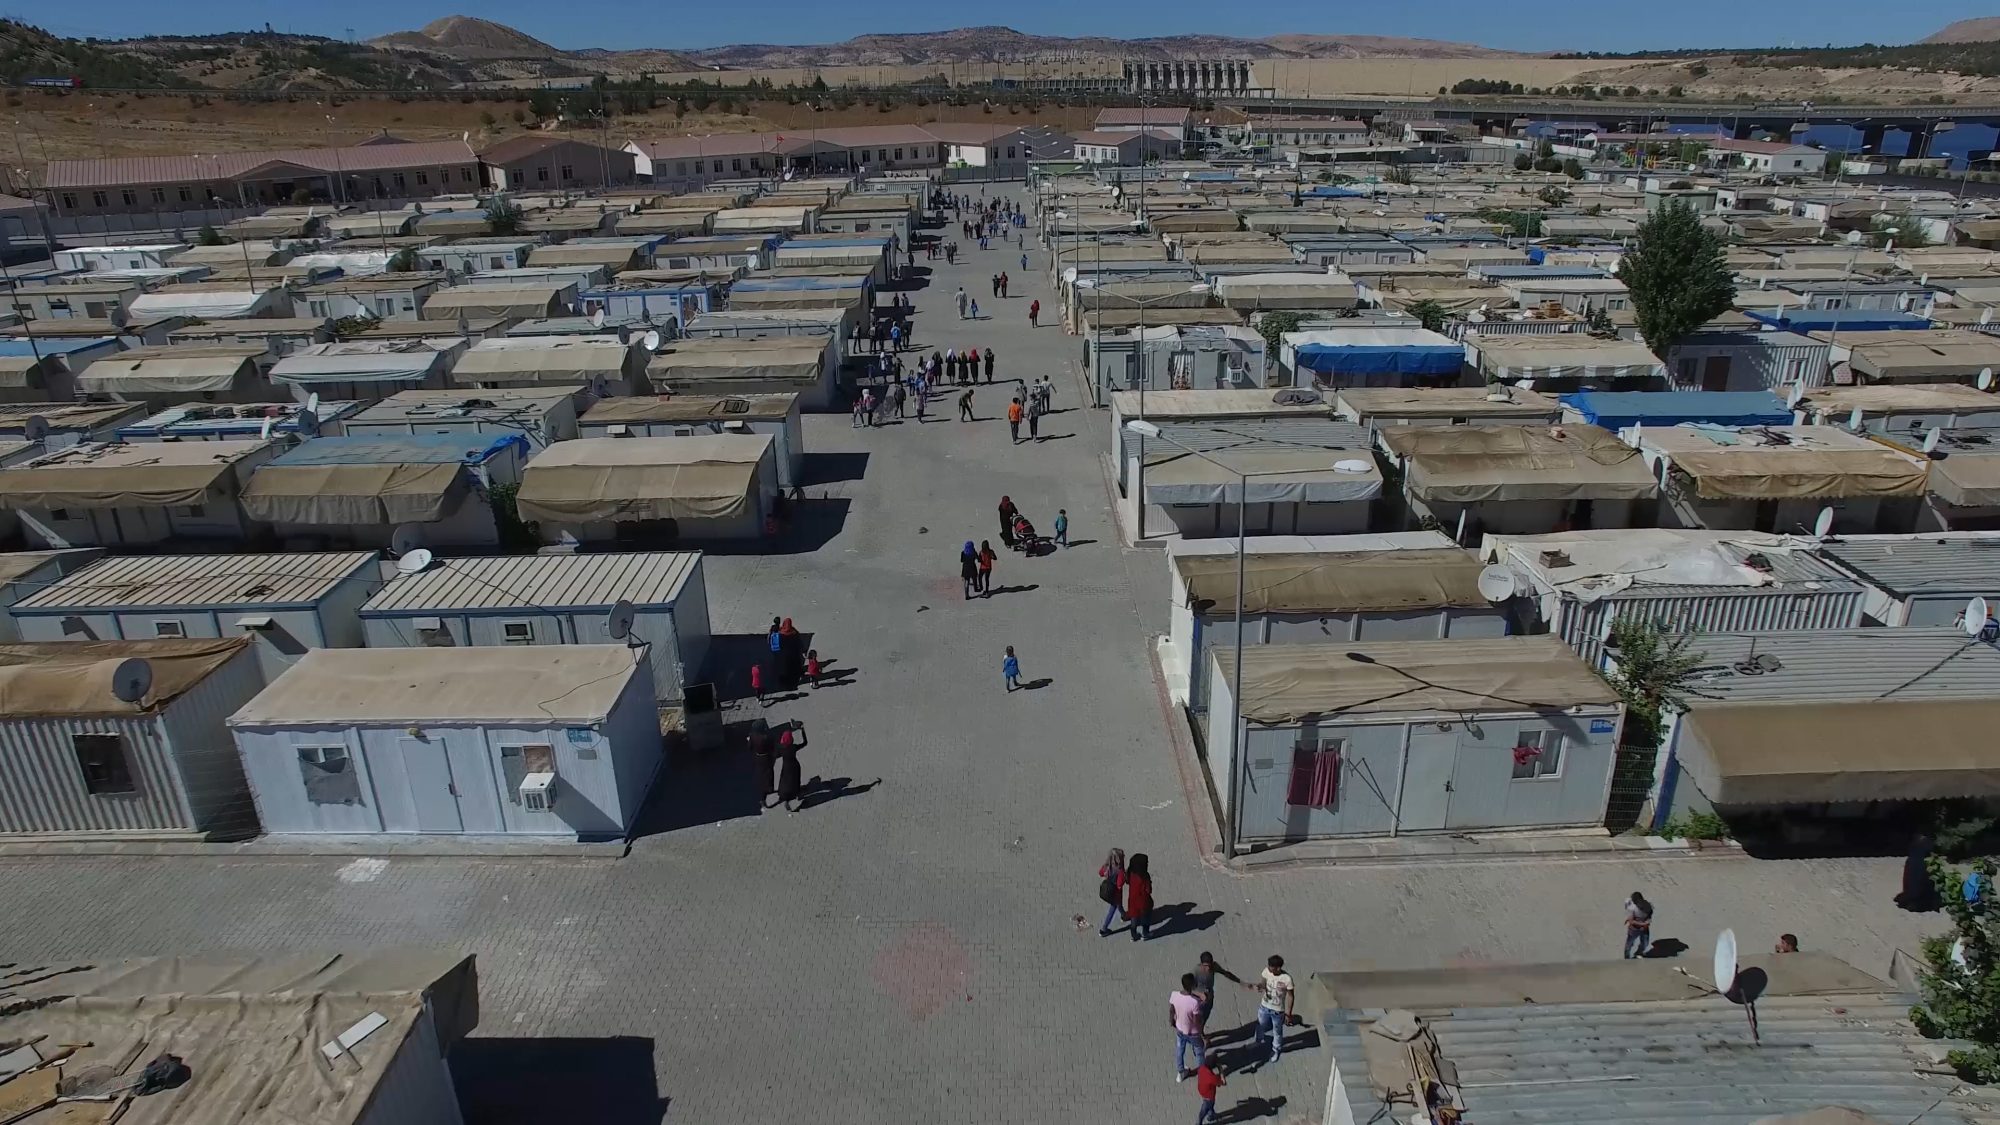 Drone images from Syrian refugee living in refugee camps in Gaziantep, Turkey